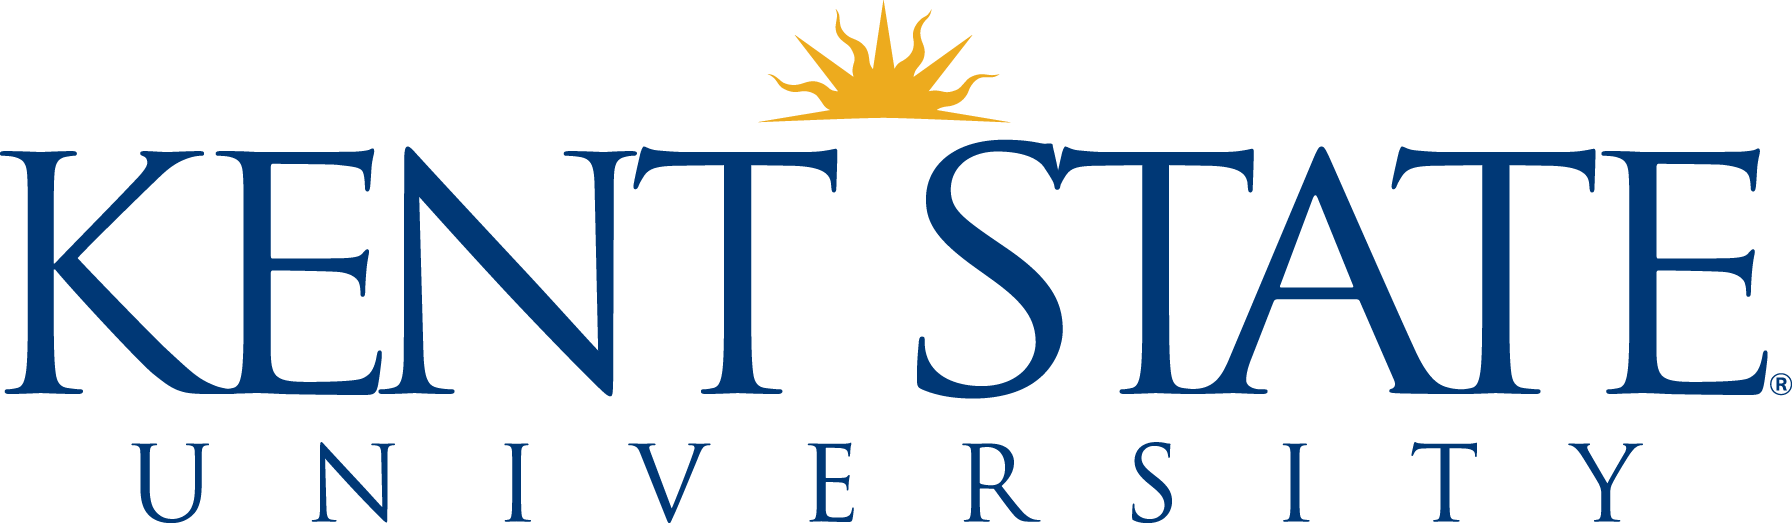 clipart kent state, kent state Transparent FREE